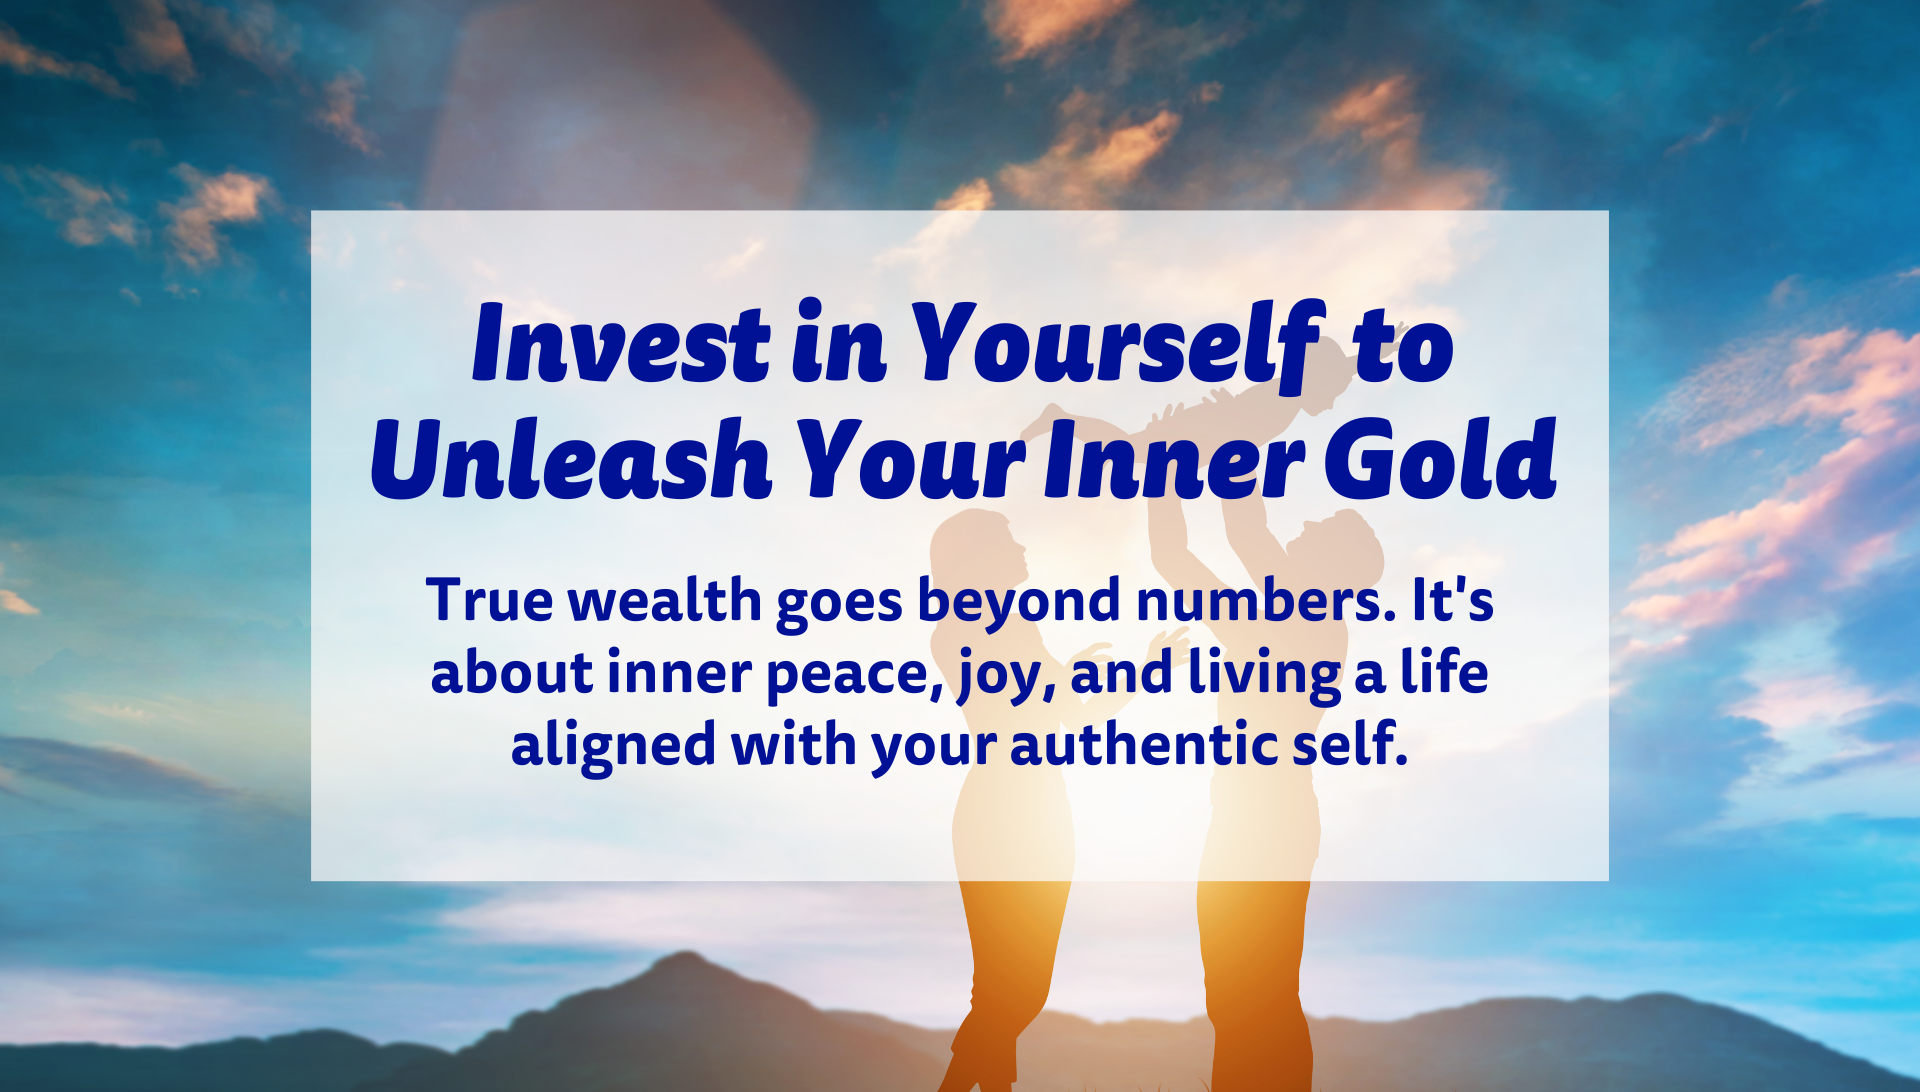 So, invest in yourself, claim your unique power, and watch your life transform.